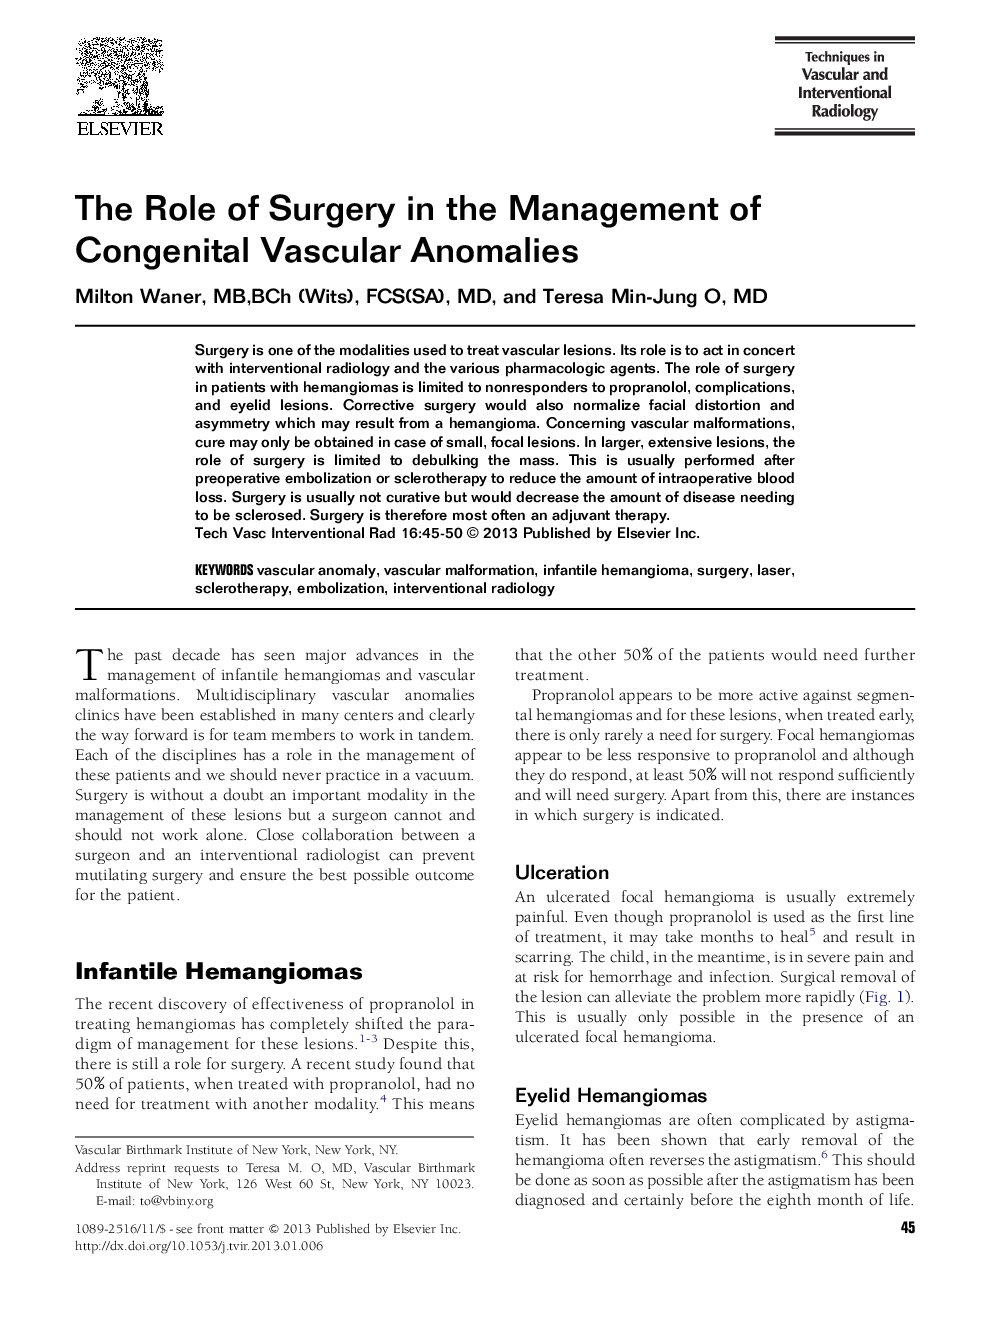 The Role of Surgery in the Management of Congenital Vascular Anomalies